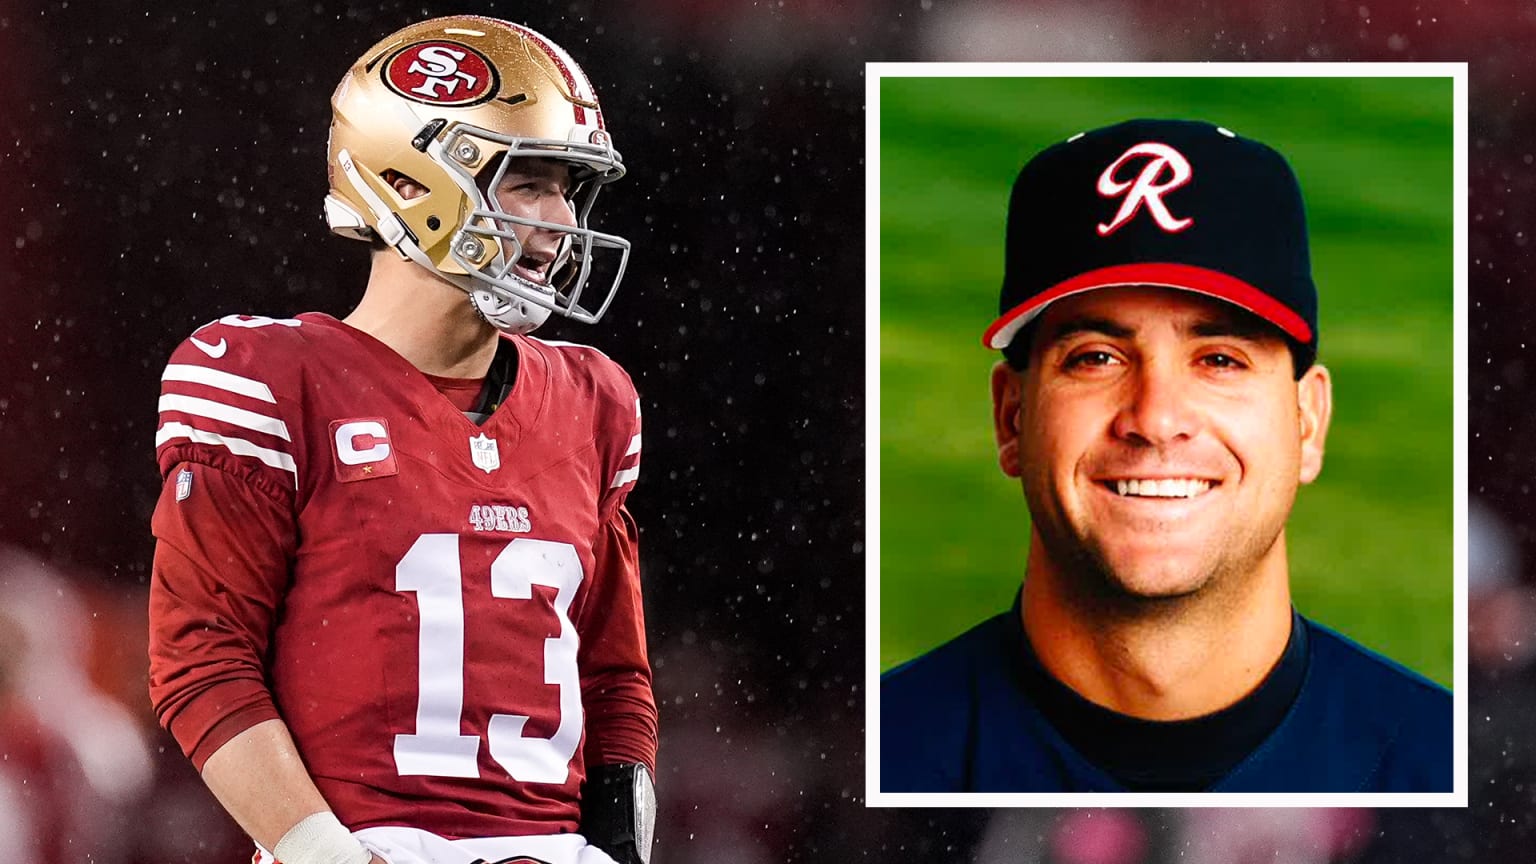 49ers quarterback Brock Purdy with an inset image of his dad Shawn as a Minor Leaguer